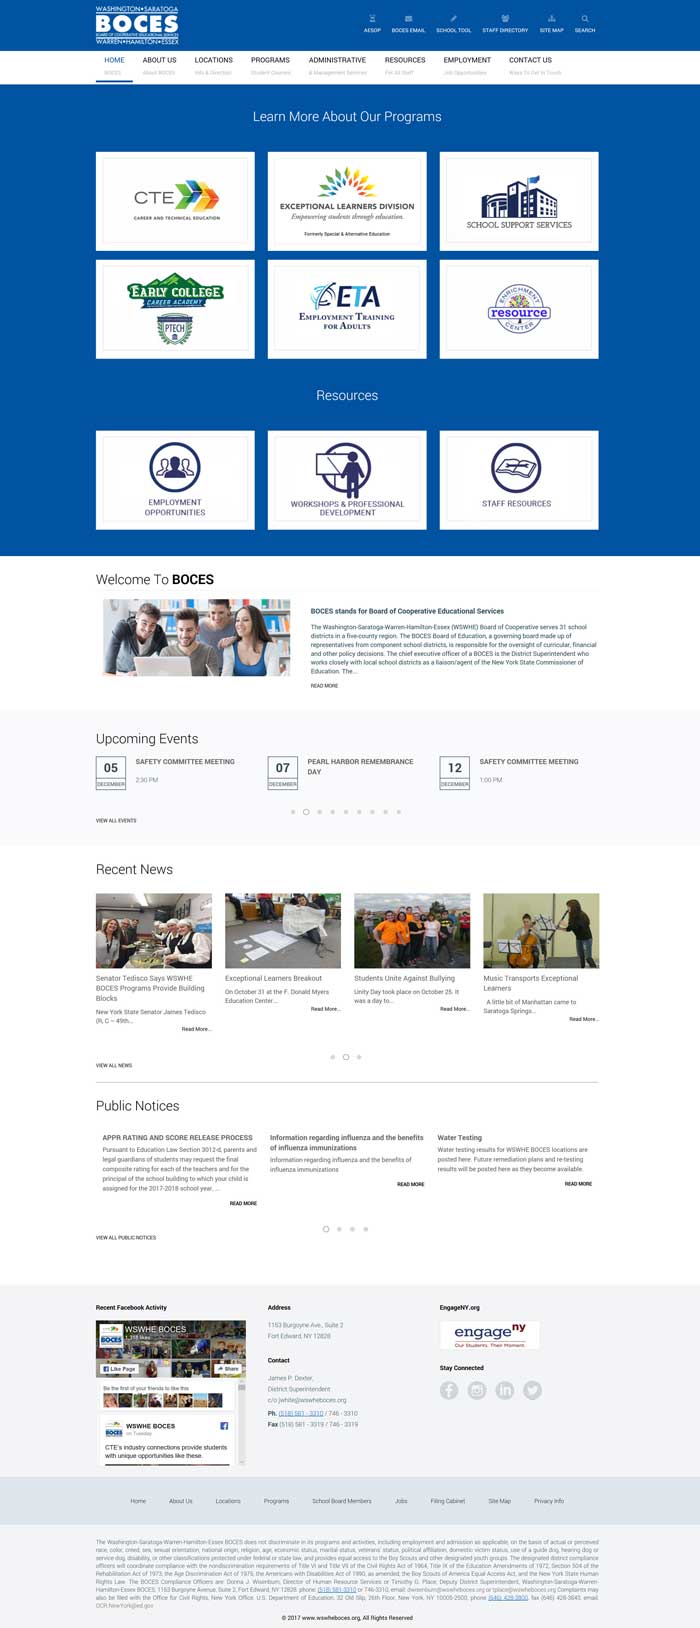 WSWHE BOCES homepage